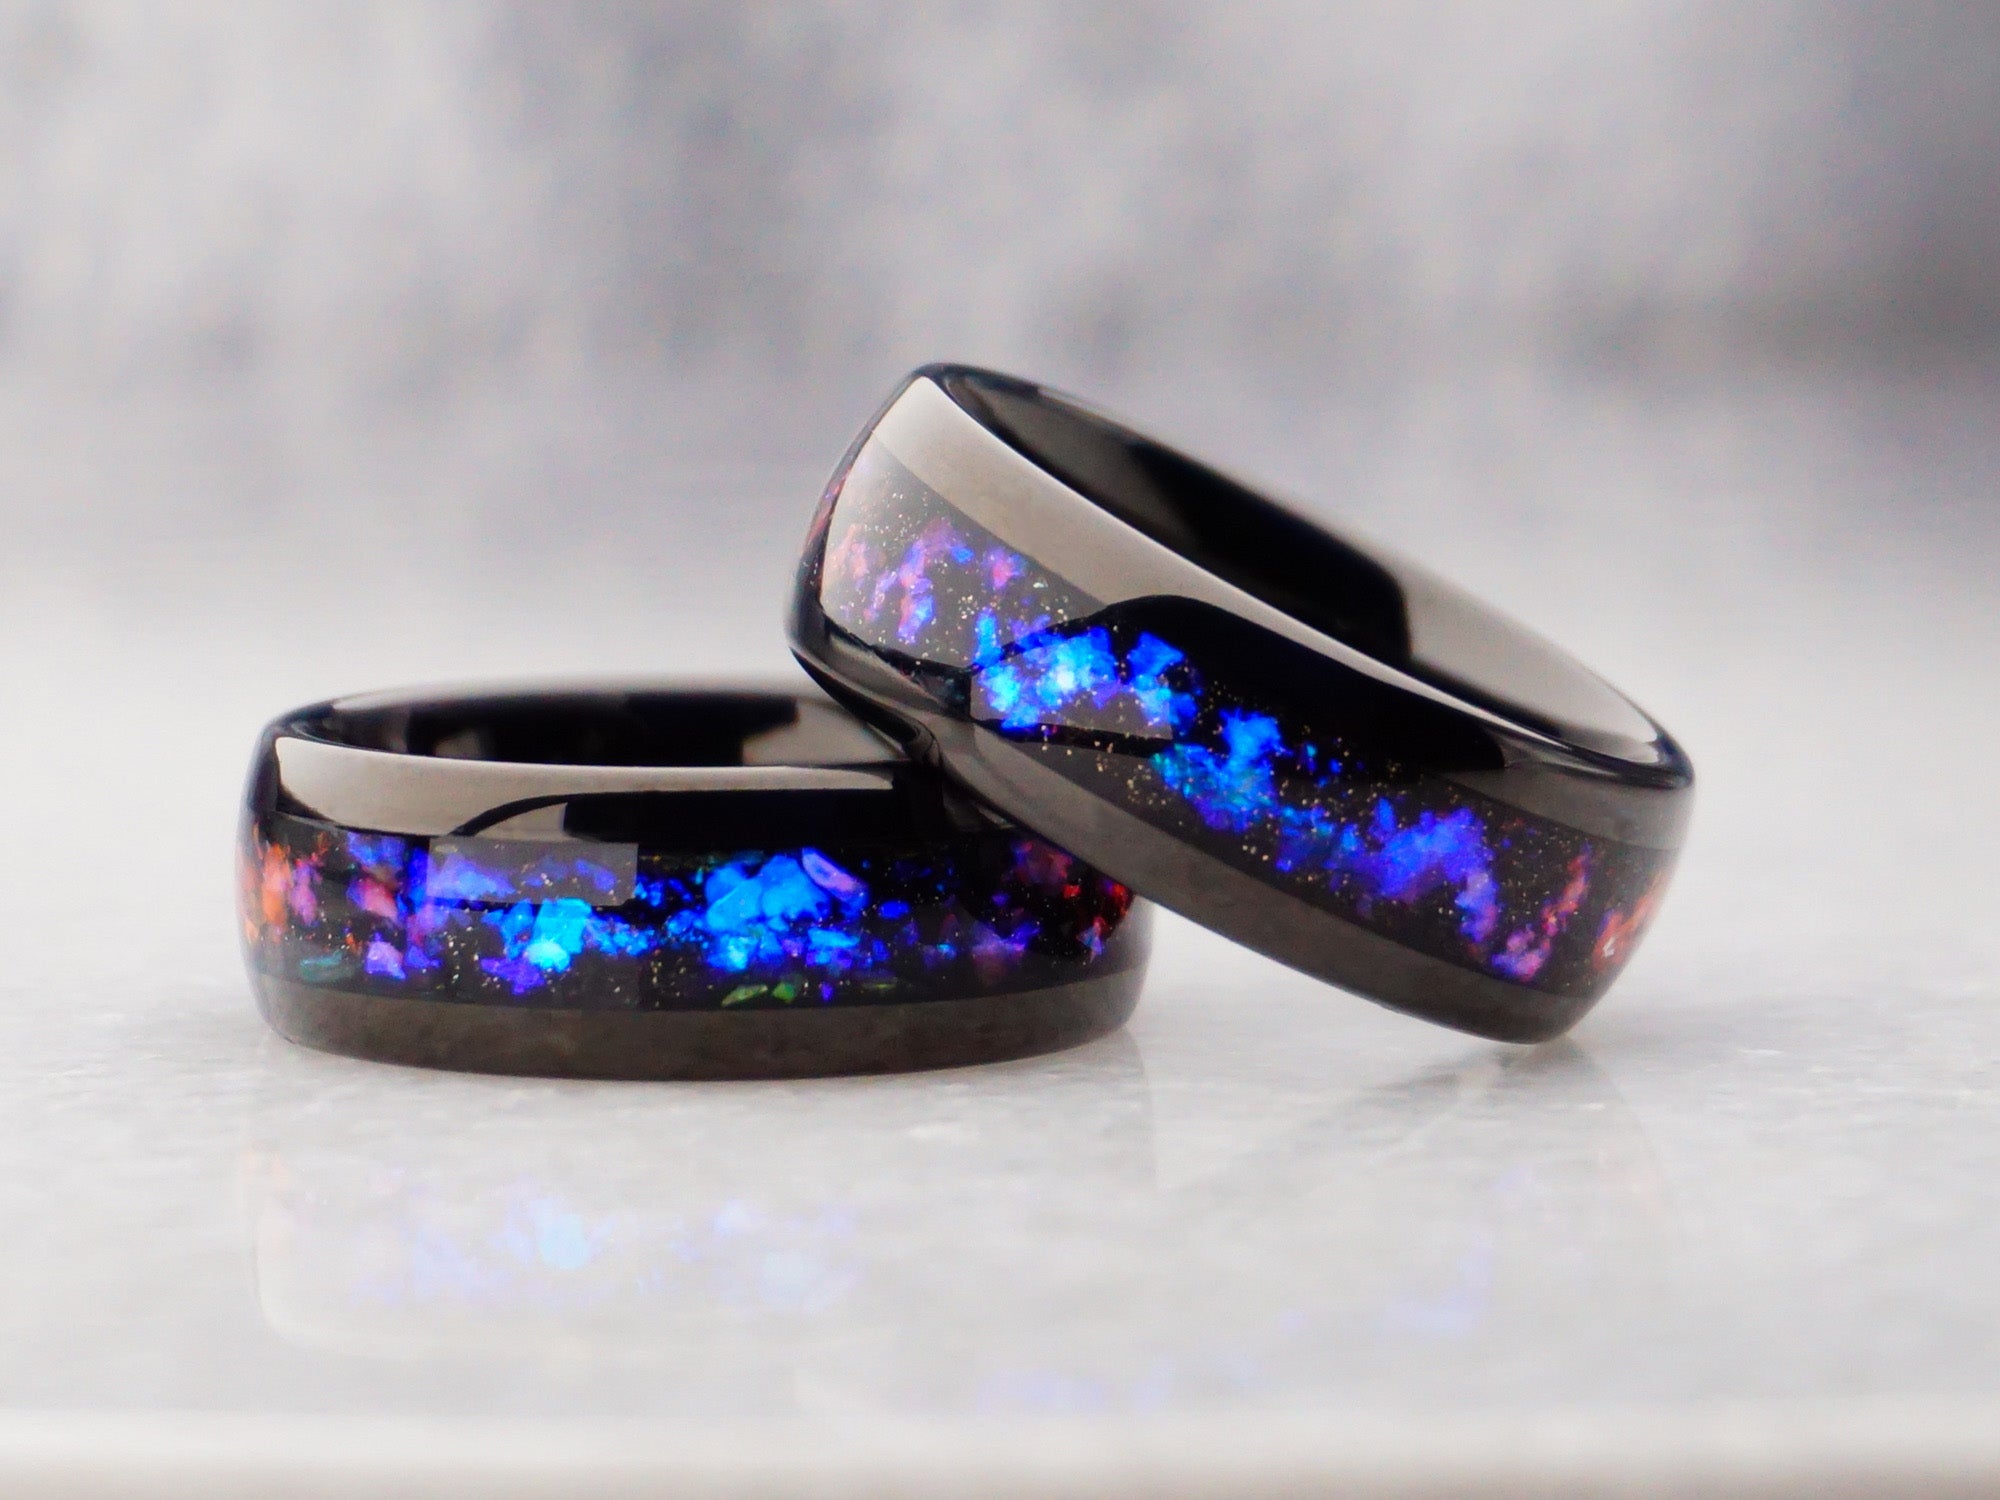 8mm galaxy ring, polished black tungsten ring with purple and blue milky way inlay, modern mens wedding ring